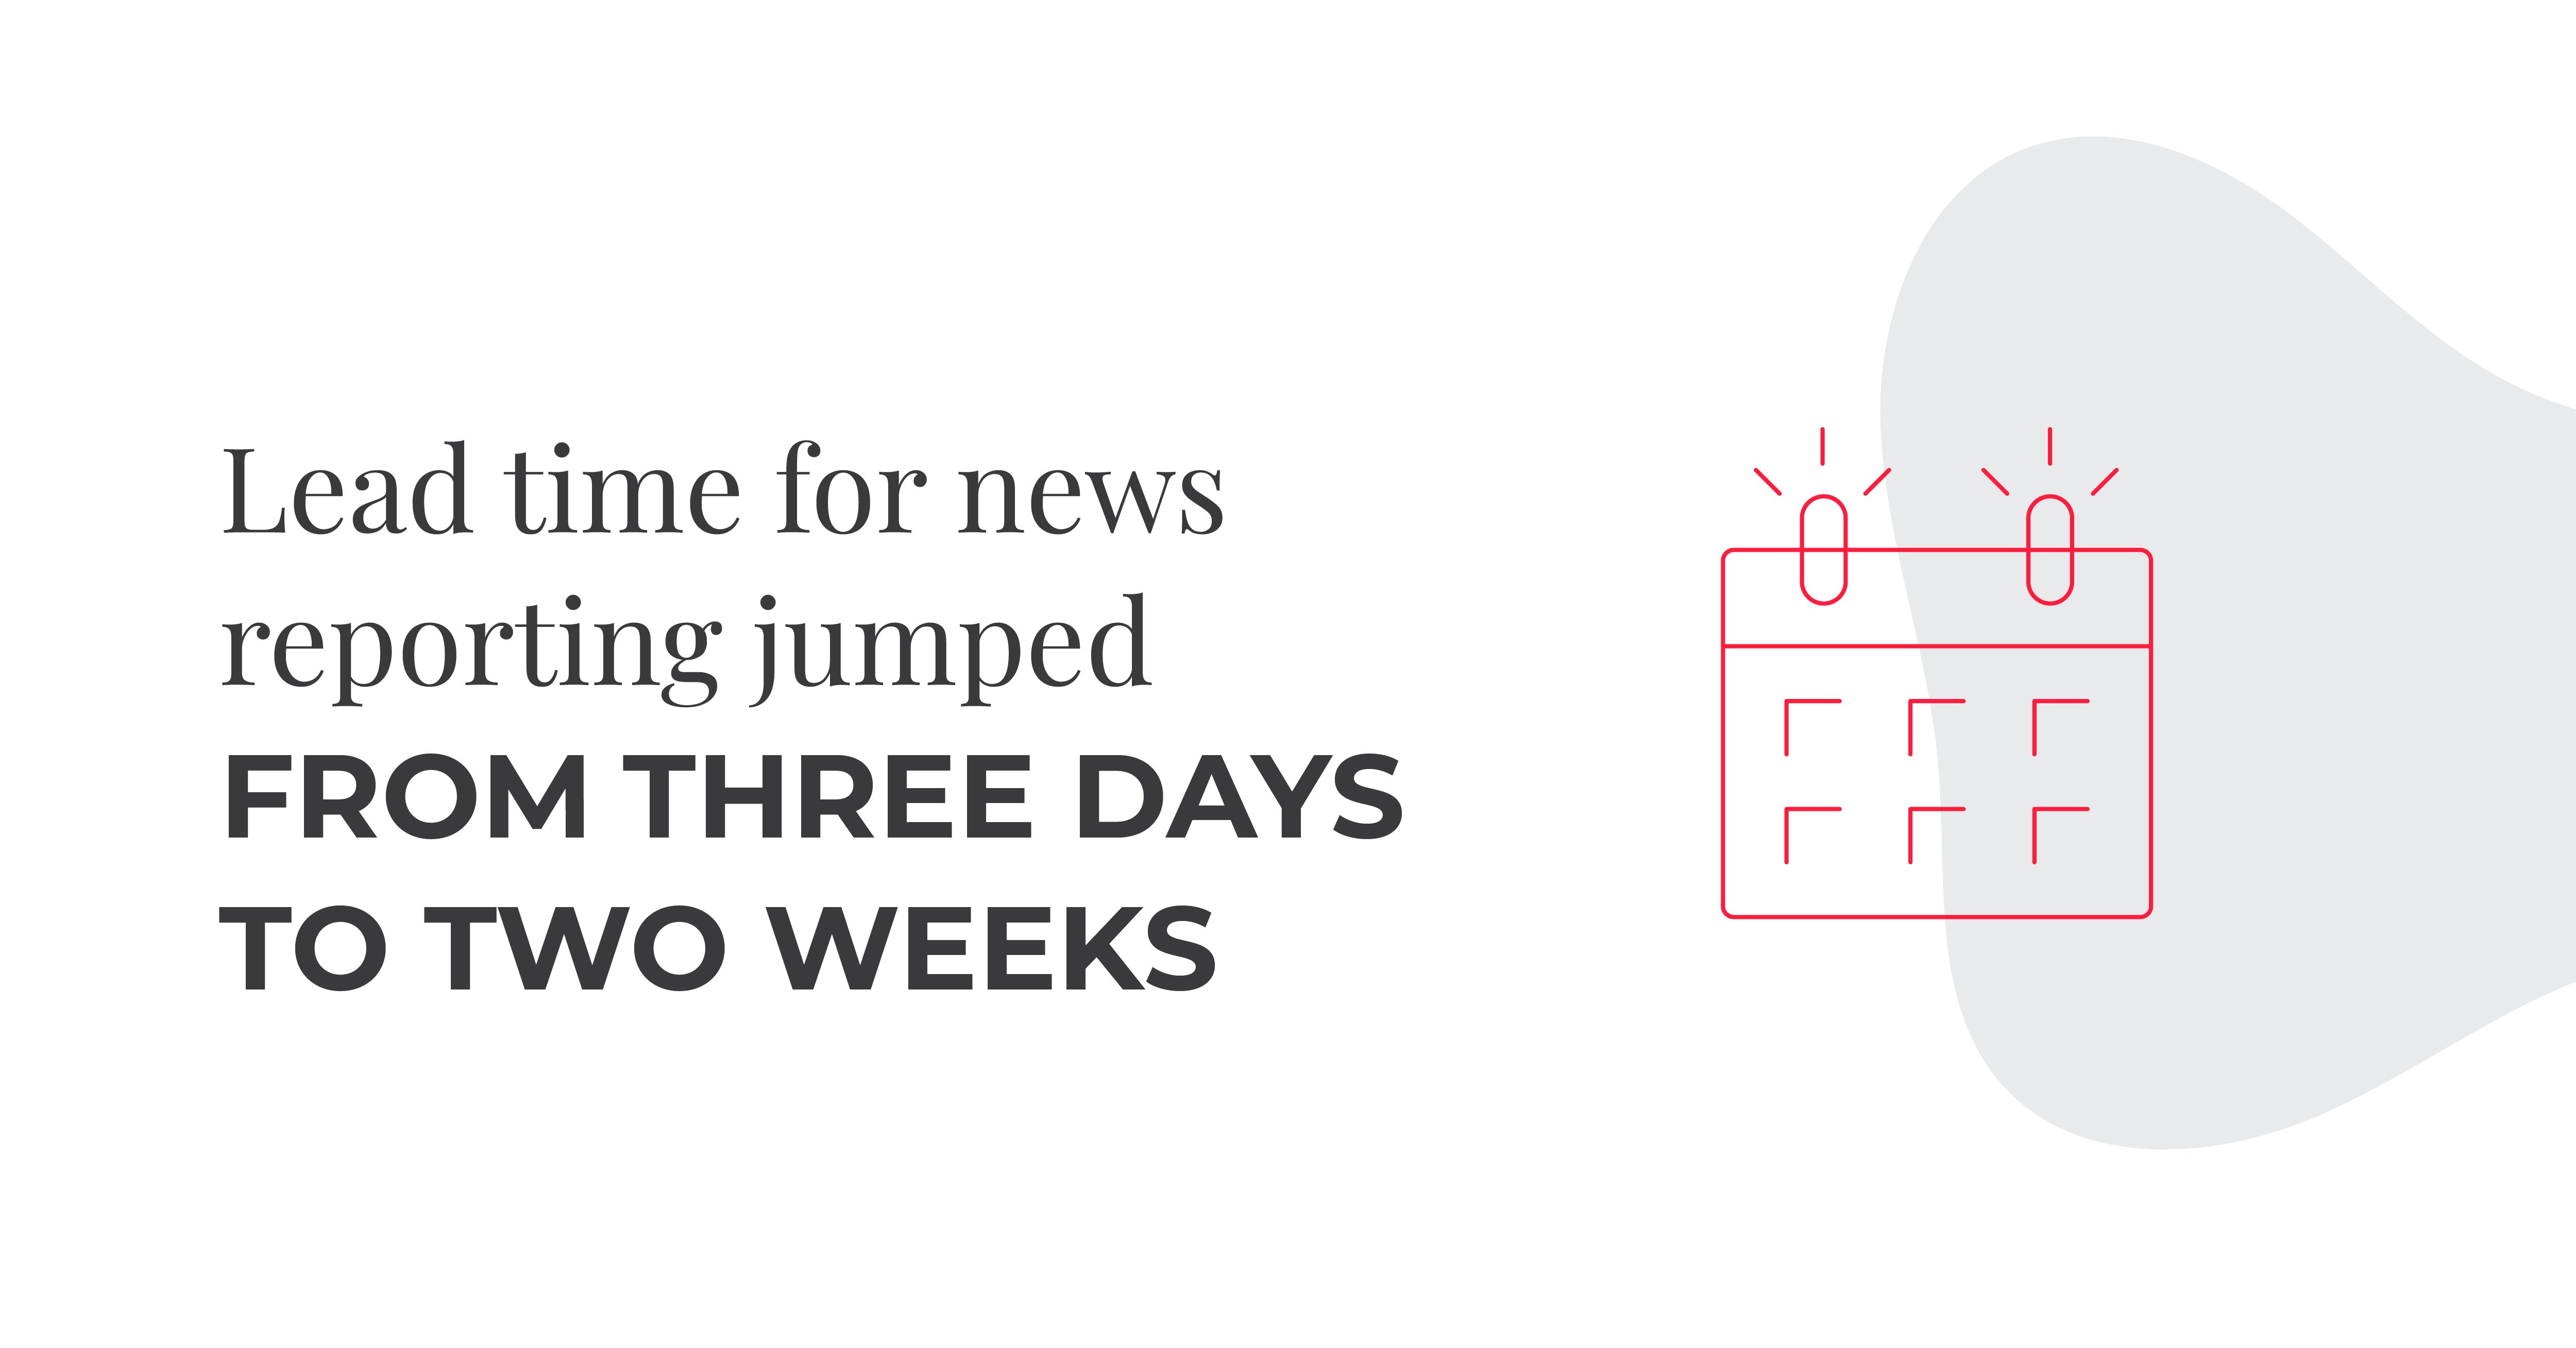 lead time for news reporting jumped from three days to two weeks